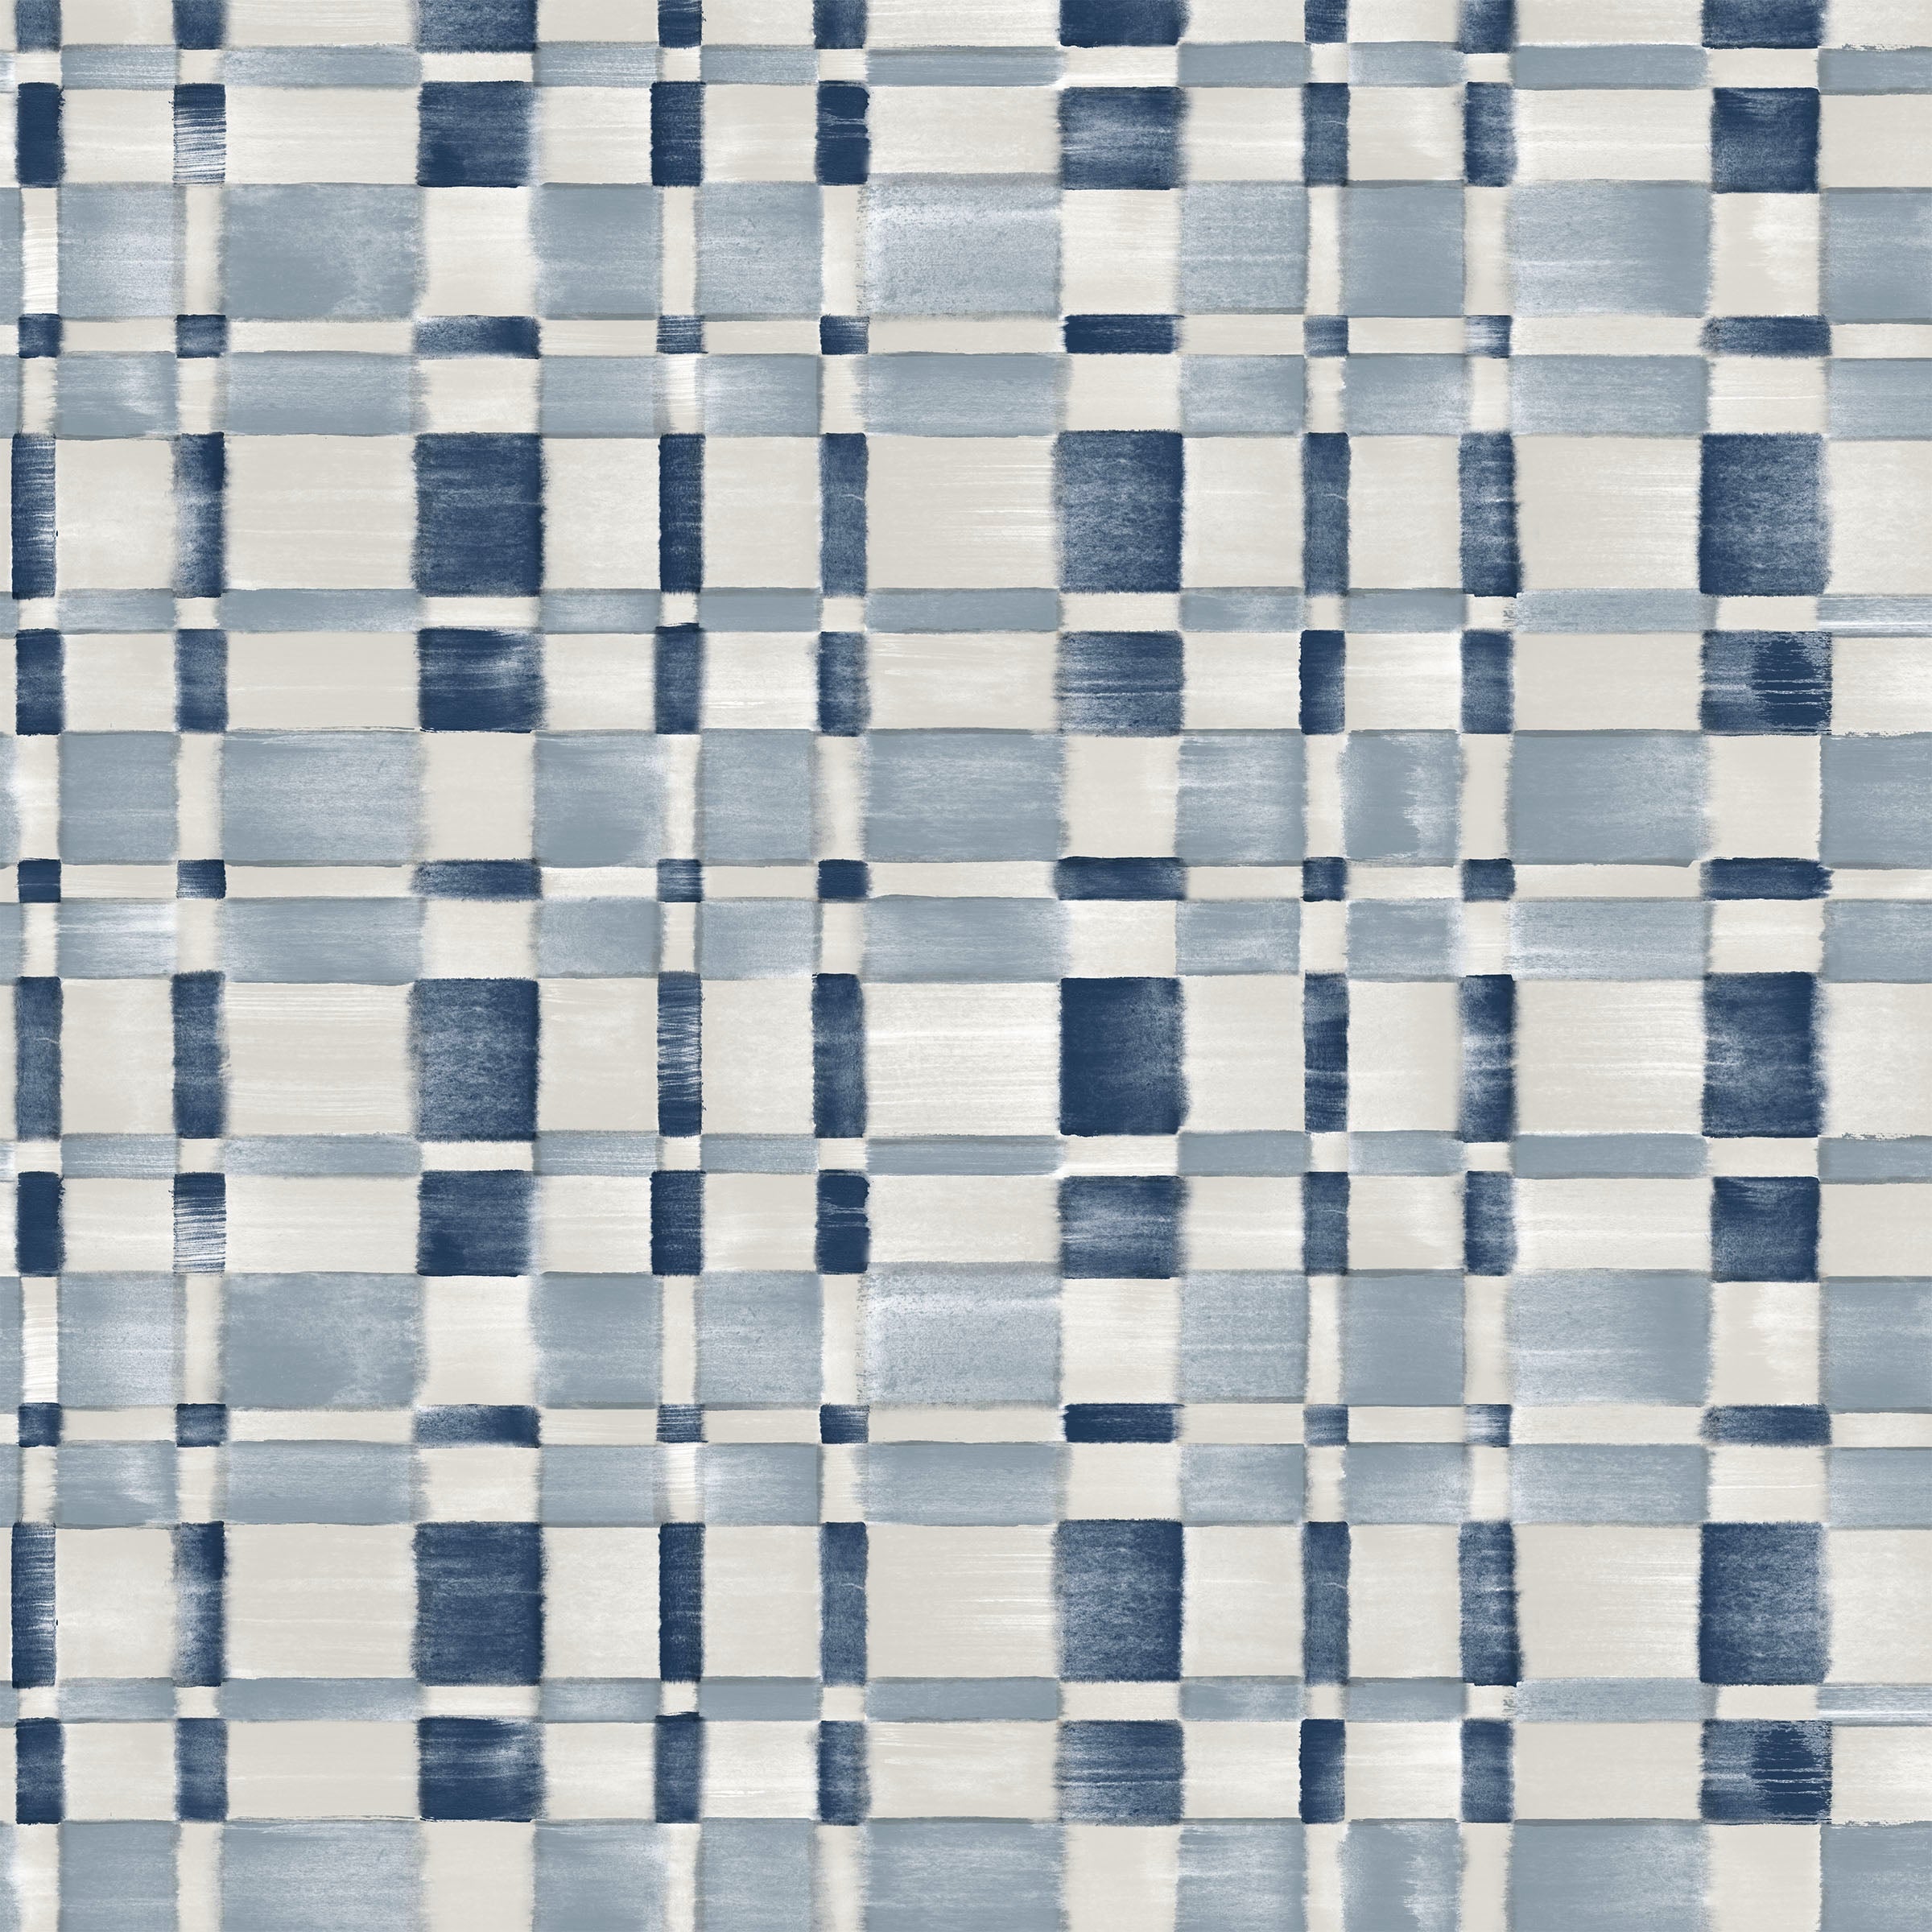 Detail of fabric in a large-scale checked pattern in shades of cream and blue.